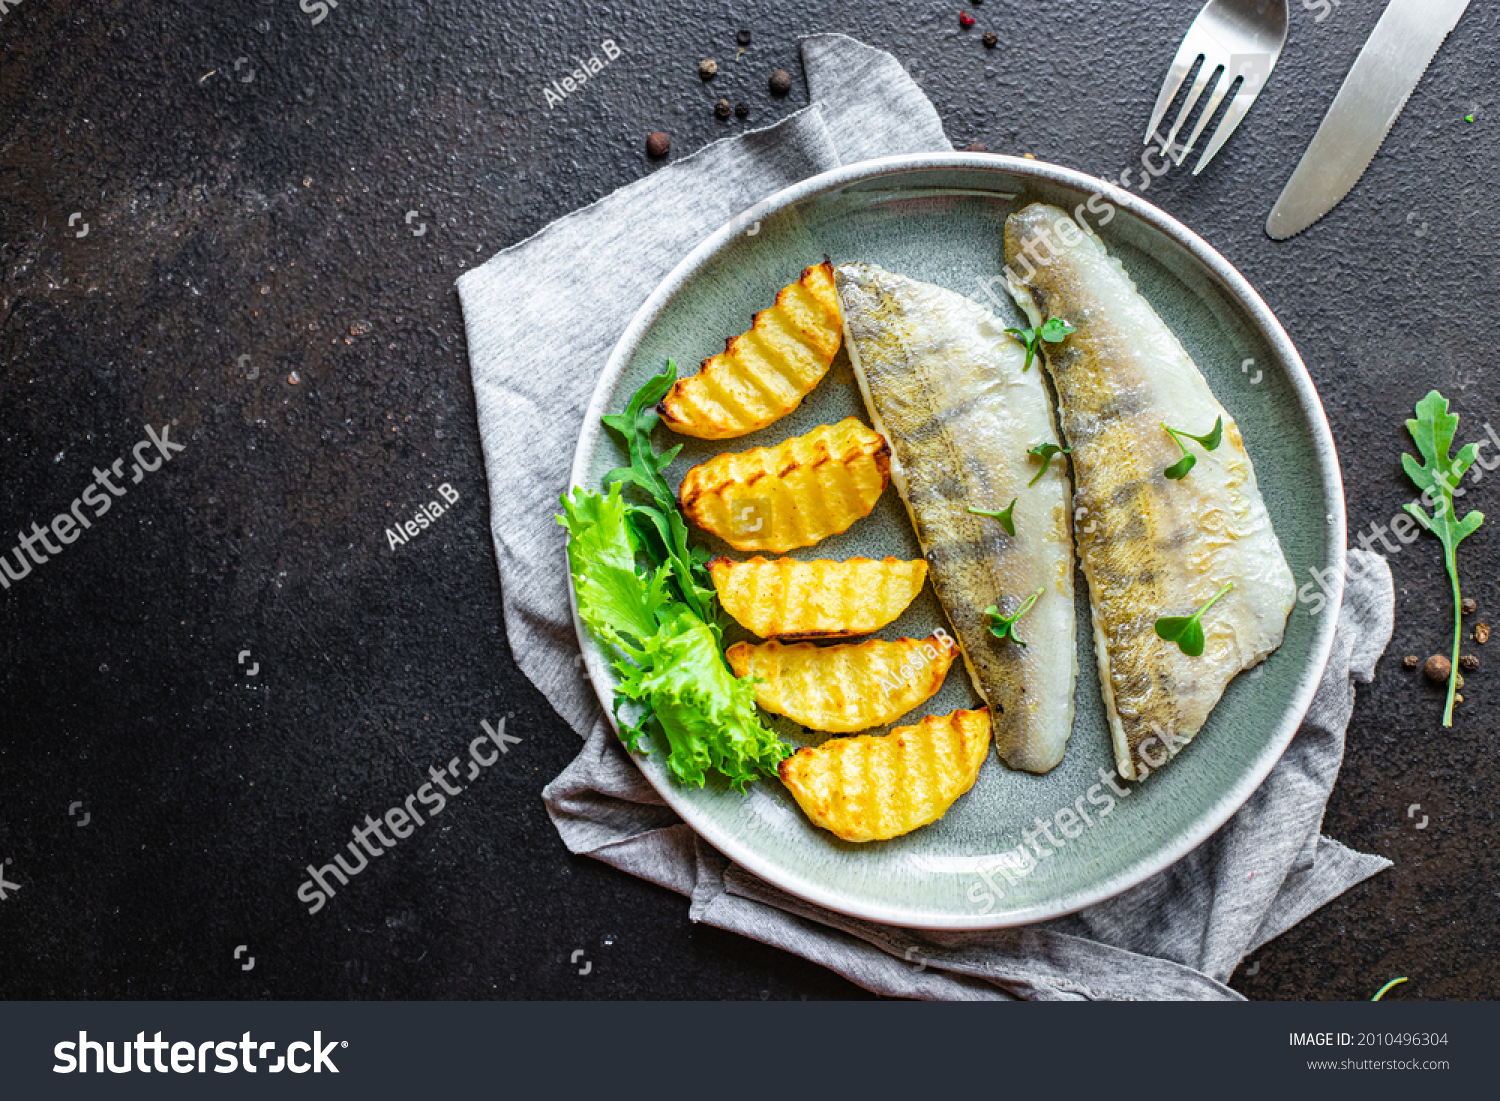 fried fish and potatoes pike perch fish fresh seafood food organic products meal snack copy space food background rustic. top view keto or paleo diet vegetarian food pescetarian diet #2010496304